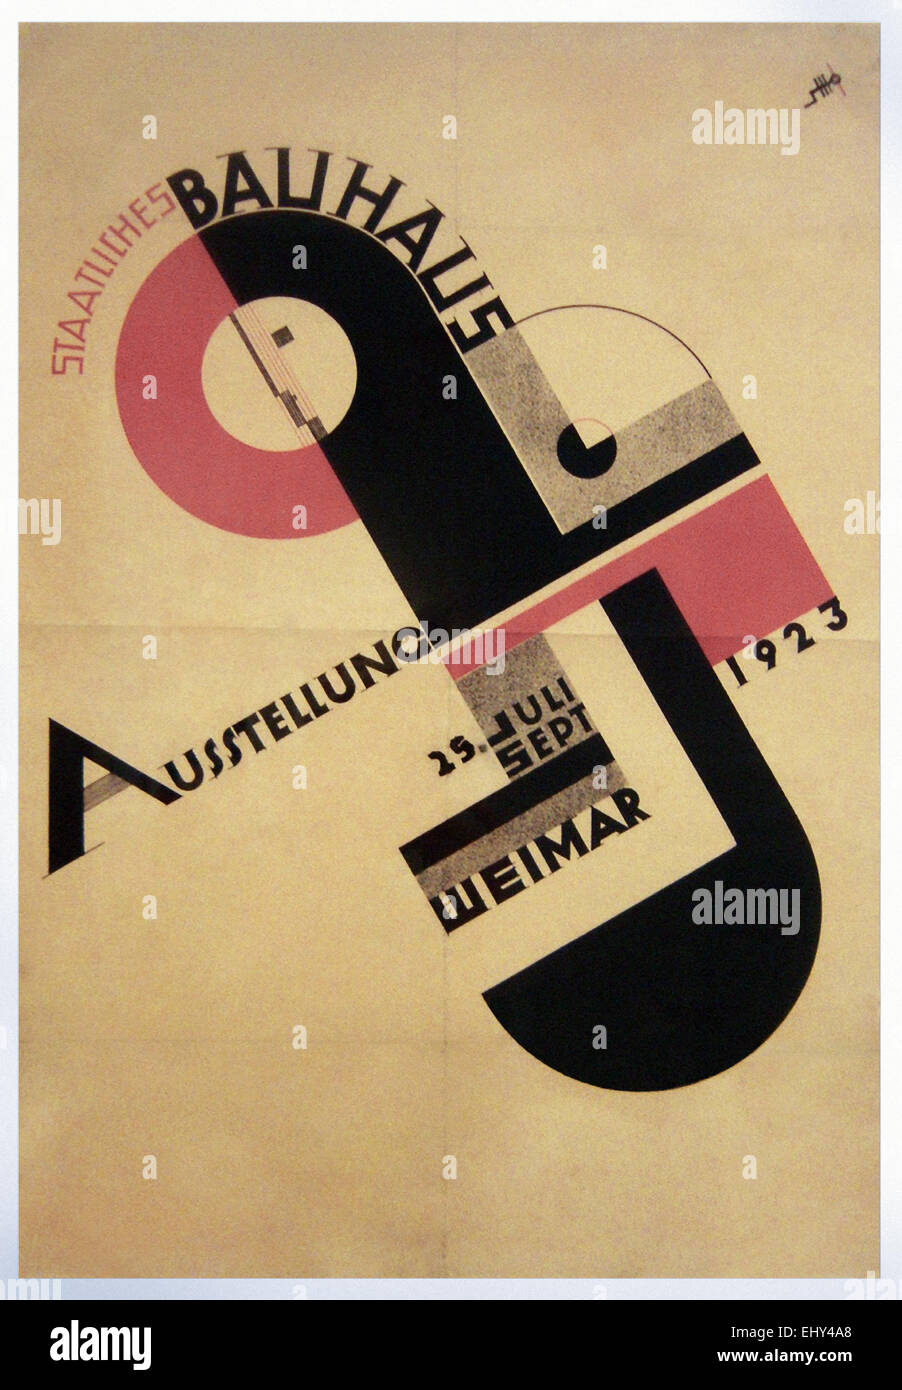 Poster for the 1923 Bauhaus Exhibition in Weimar (July-Sept 1923) designed by Joost Schmidt (1893-1948). The Bauhaus held a design competition for a poster to advertise the forthcoming exhibition and this design won. Image of framed original poster on linen backing. Stock Photo